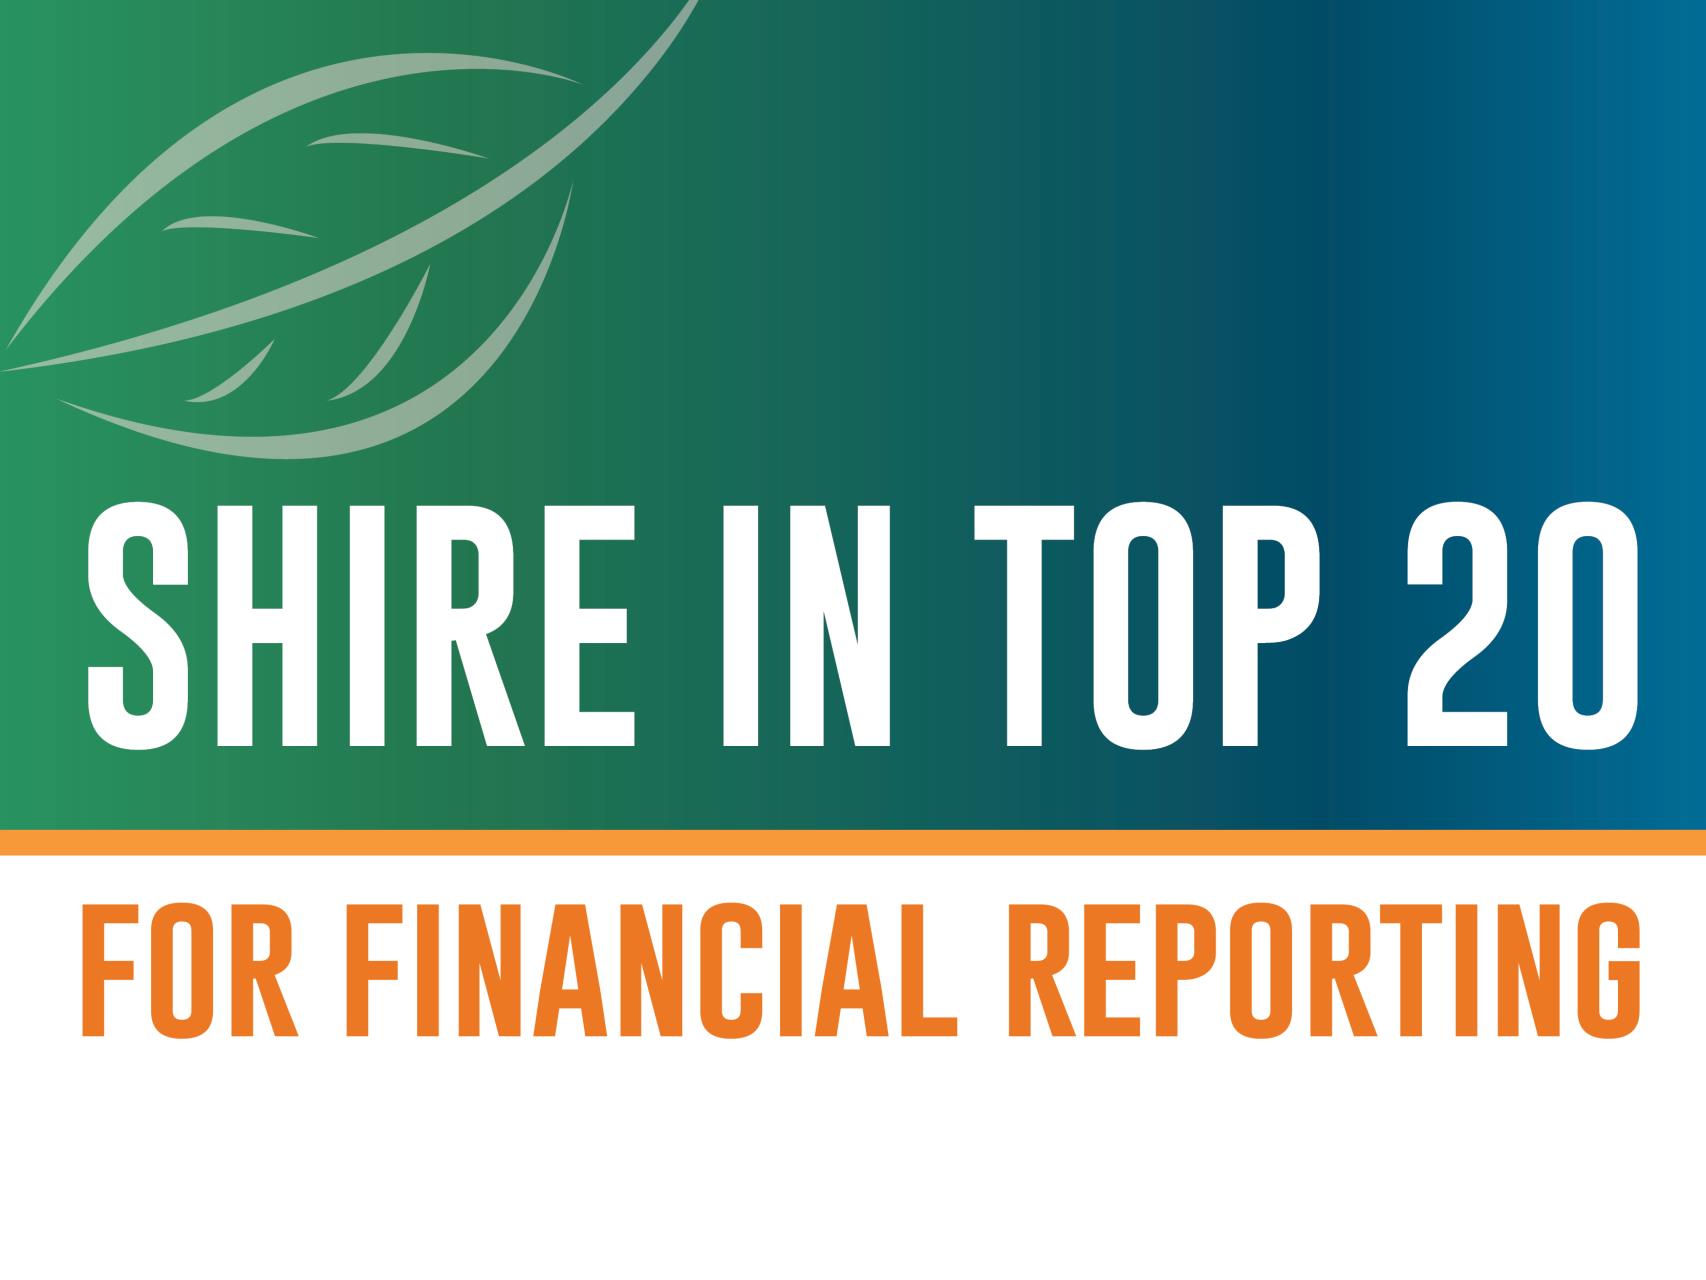 Shire in Top 20 for Financial Reporting